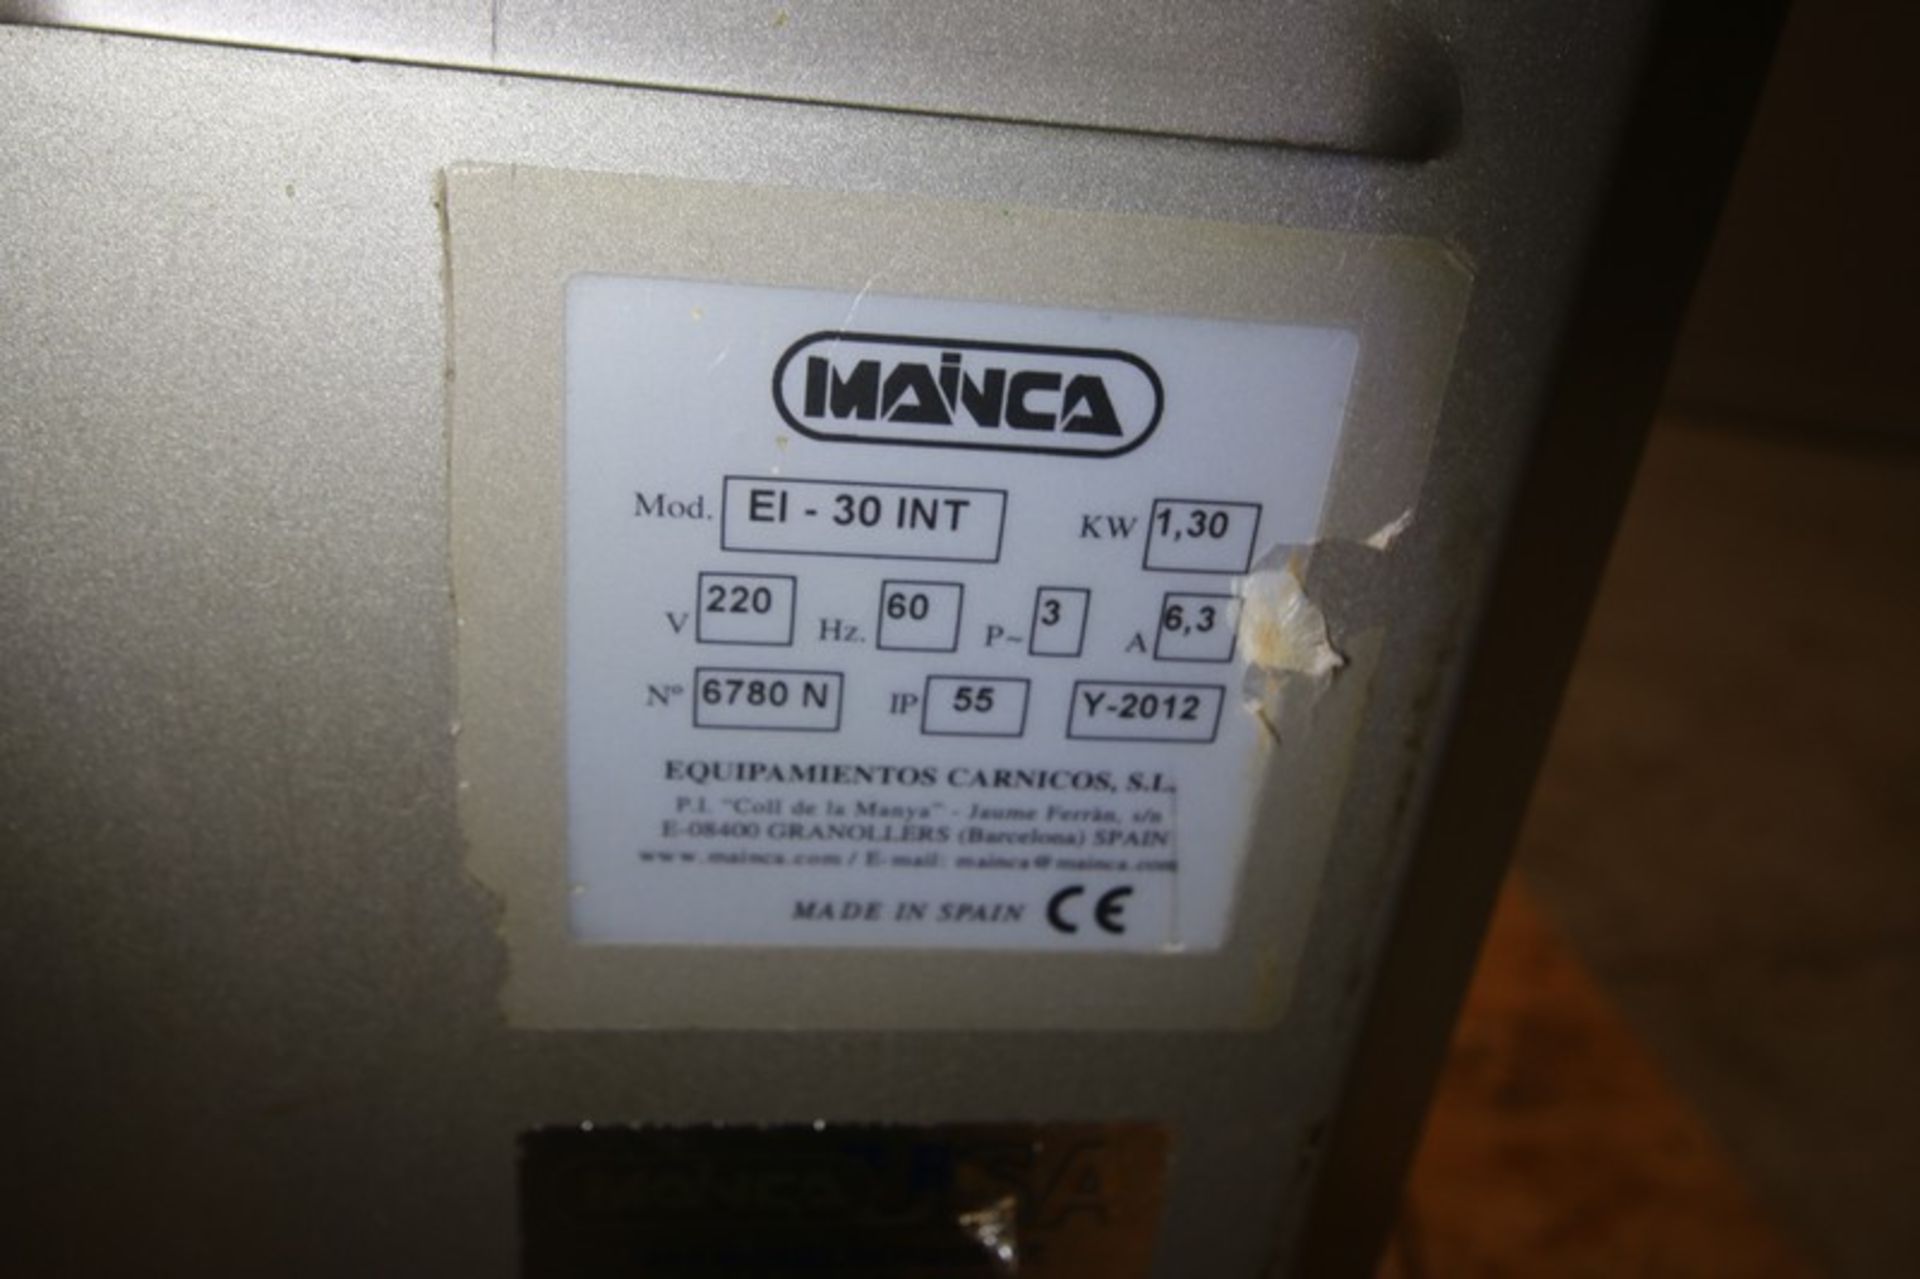 Mainca S/S Sausage Stuffer, Model EI-30 INT, SN 6780N, 220V (INV#103004) (Located @ the MDG - Image 7 of 7